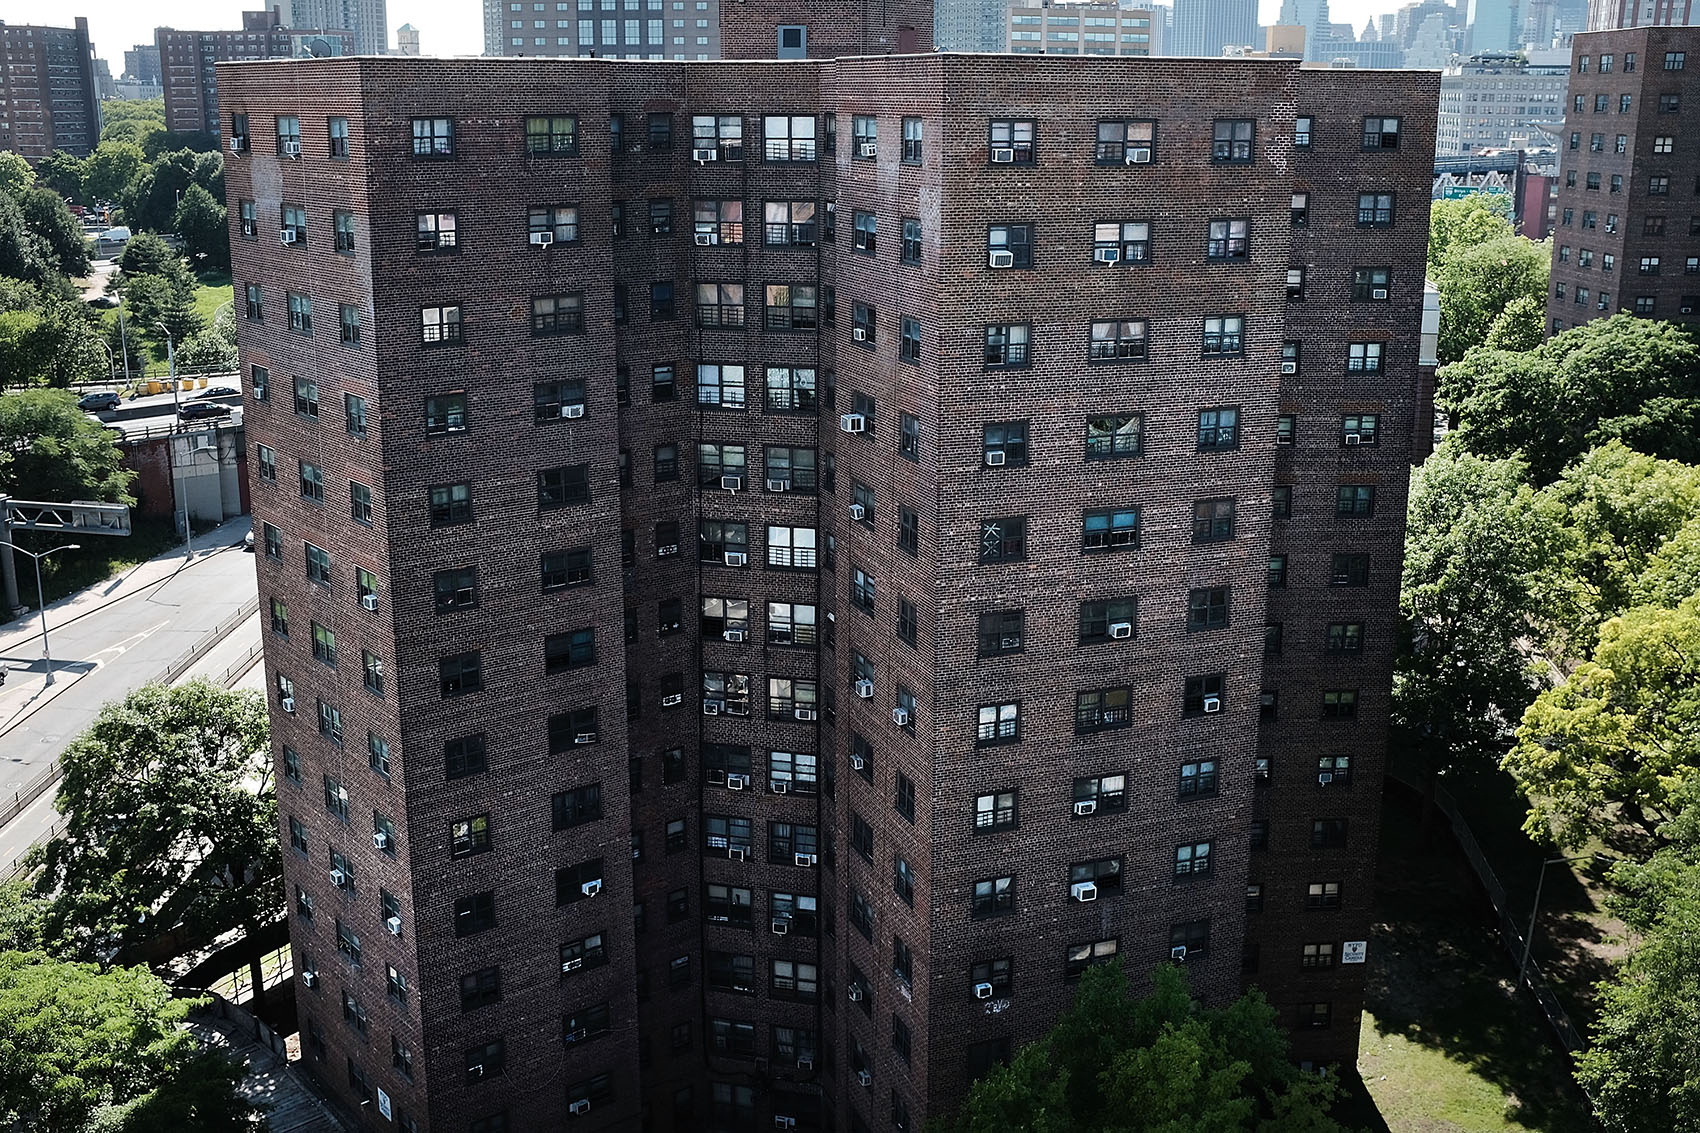 Public housing stands in Brooklyn on June 11, 2018 in New York City. (Spencer Platt/Getty Images)